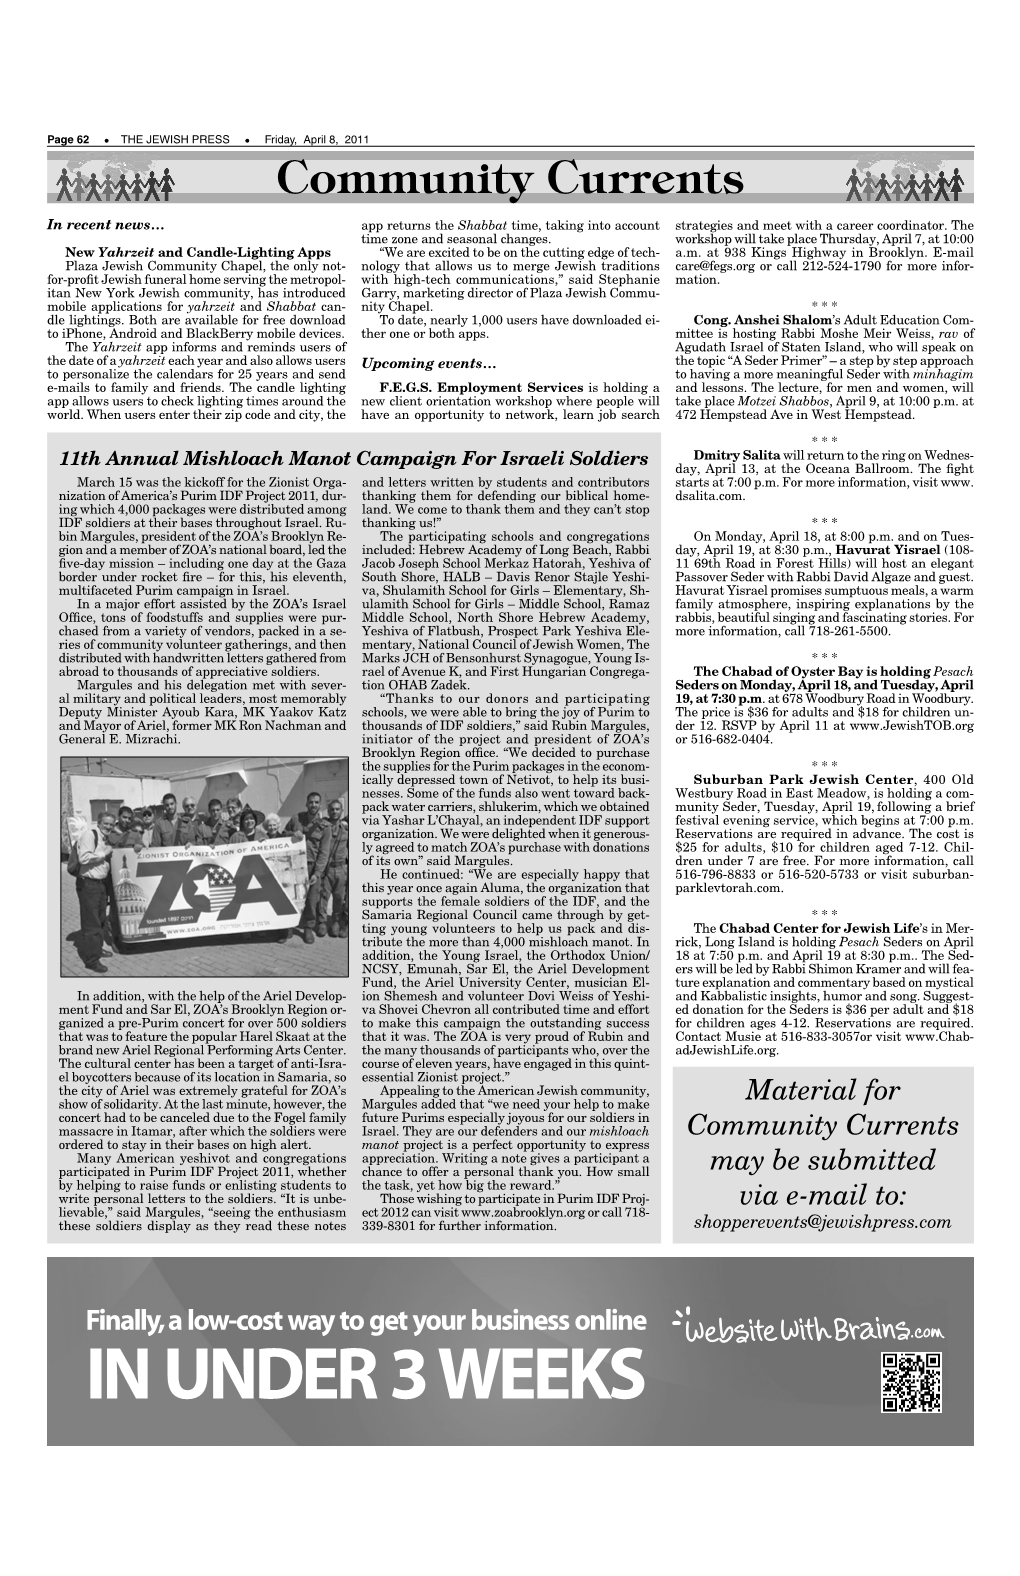 IN UNDER 3 WEEKS Friday, April 8, 2011 THE JEWISH PRESS  Page 63 Community Currents